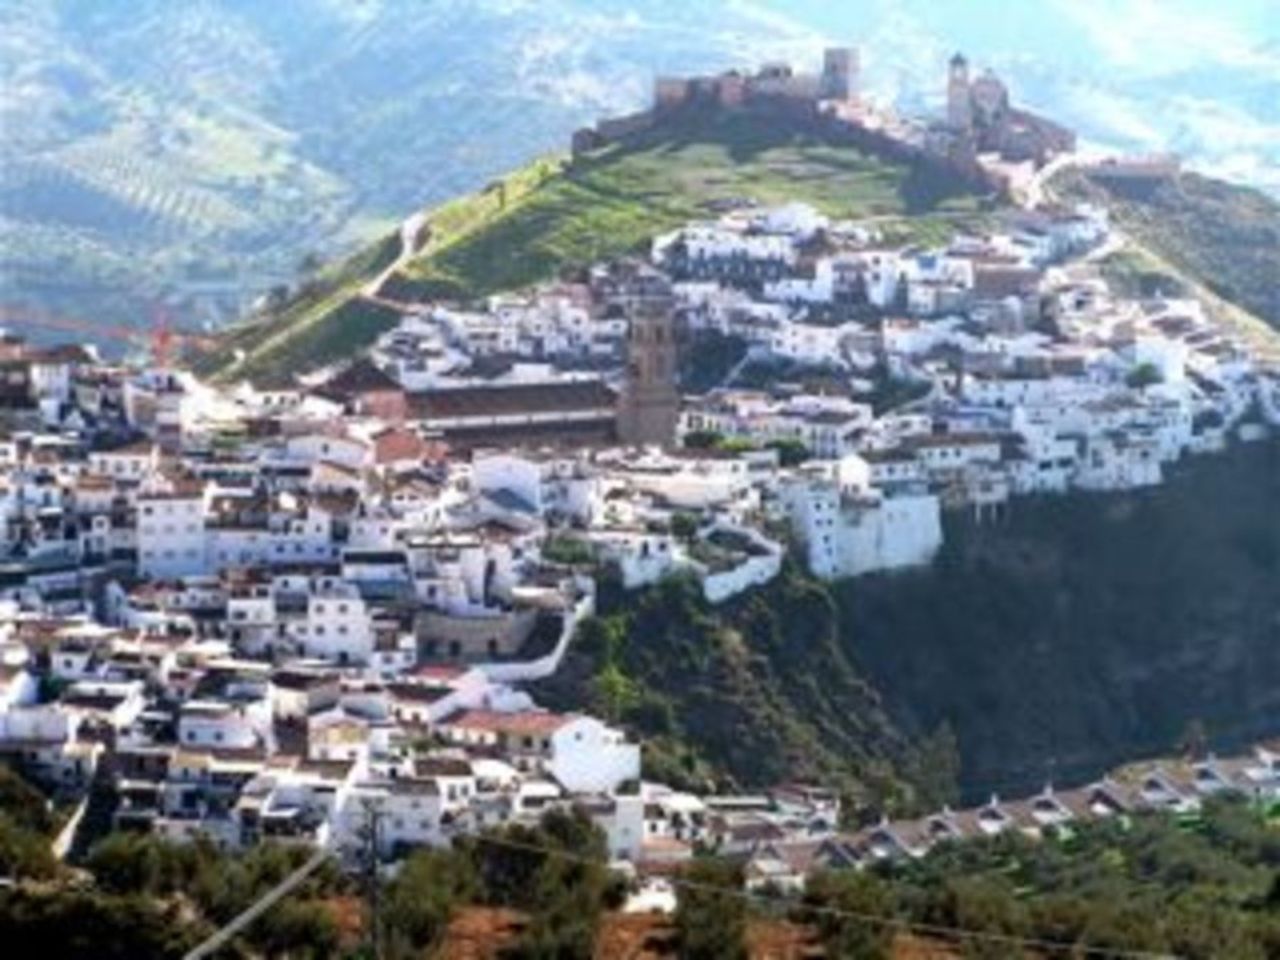 3 acres of Land in Southern Spain (Spain, Andalucia, Alora, Malaga, Spain) - Property under 50k